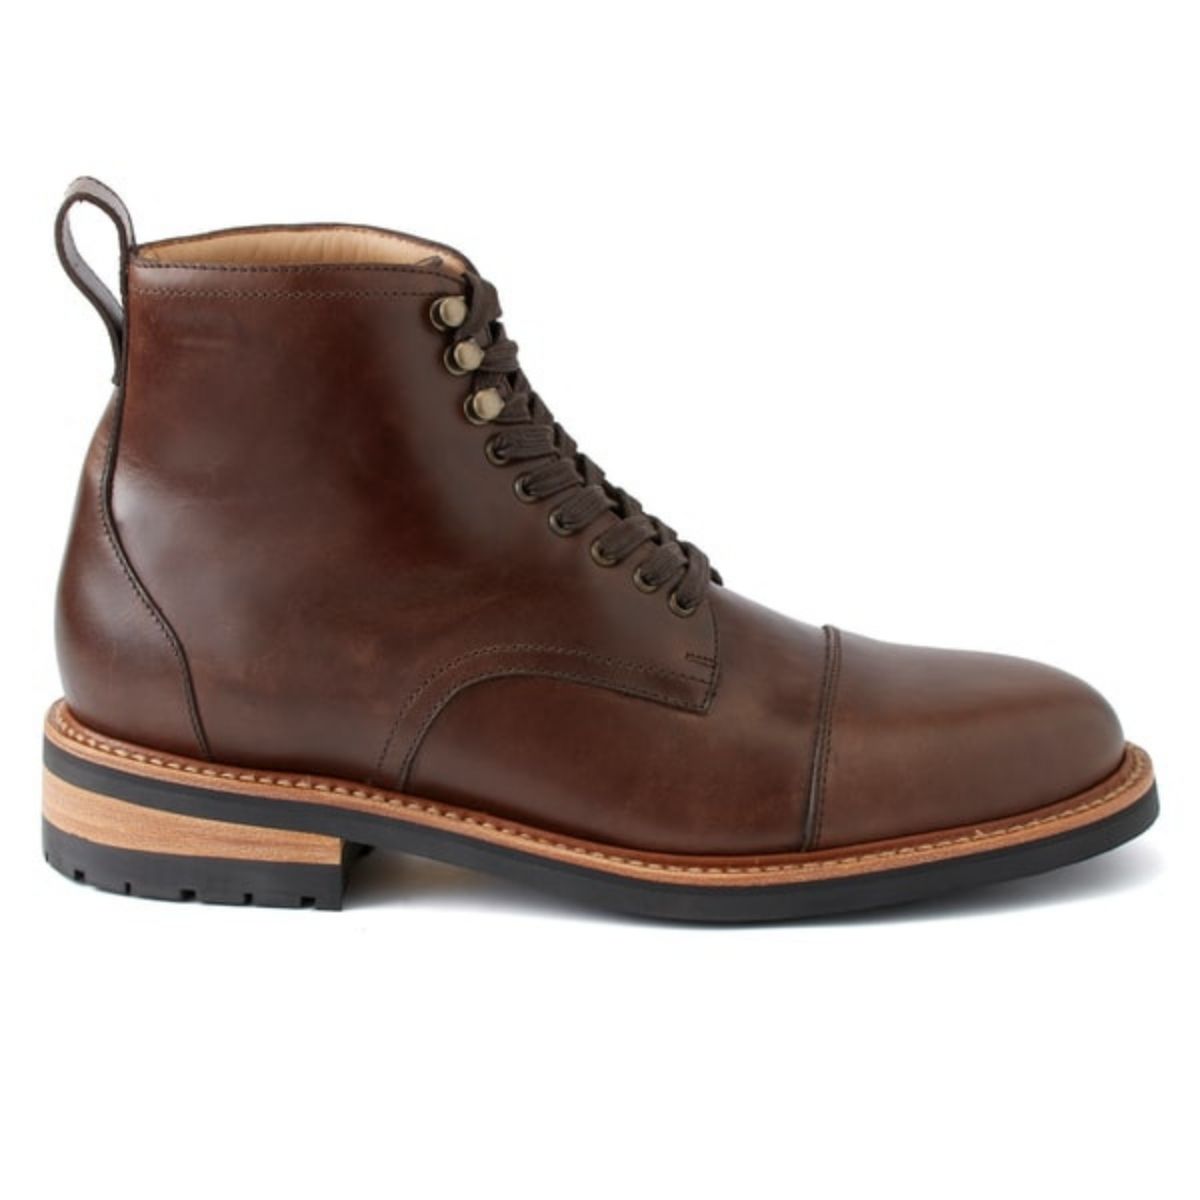 Get These Rhodes Darren Boots For Nearly 50% Off Right Now - BroBible